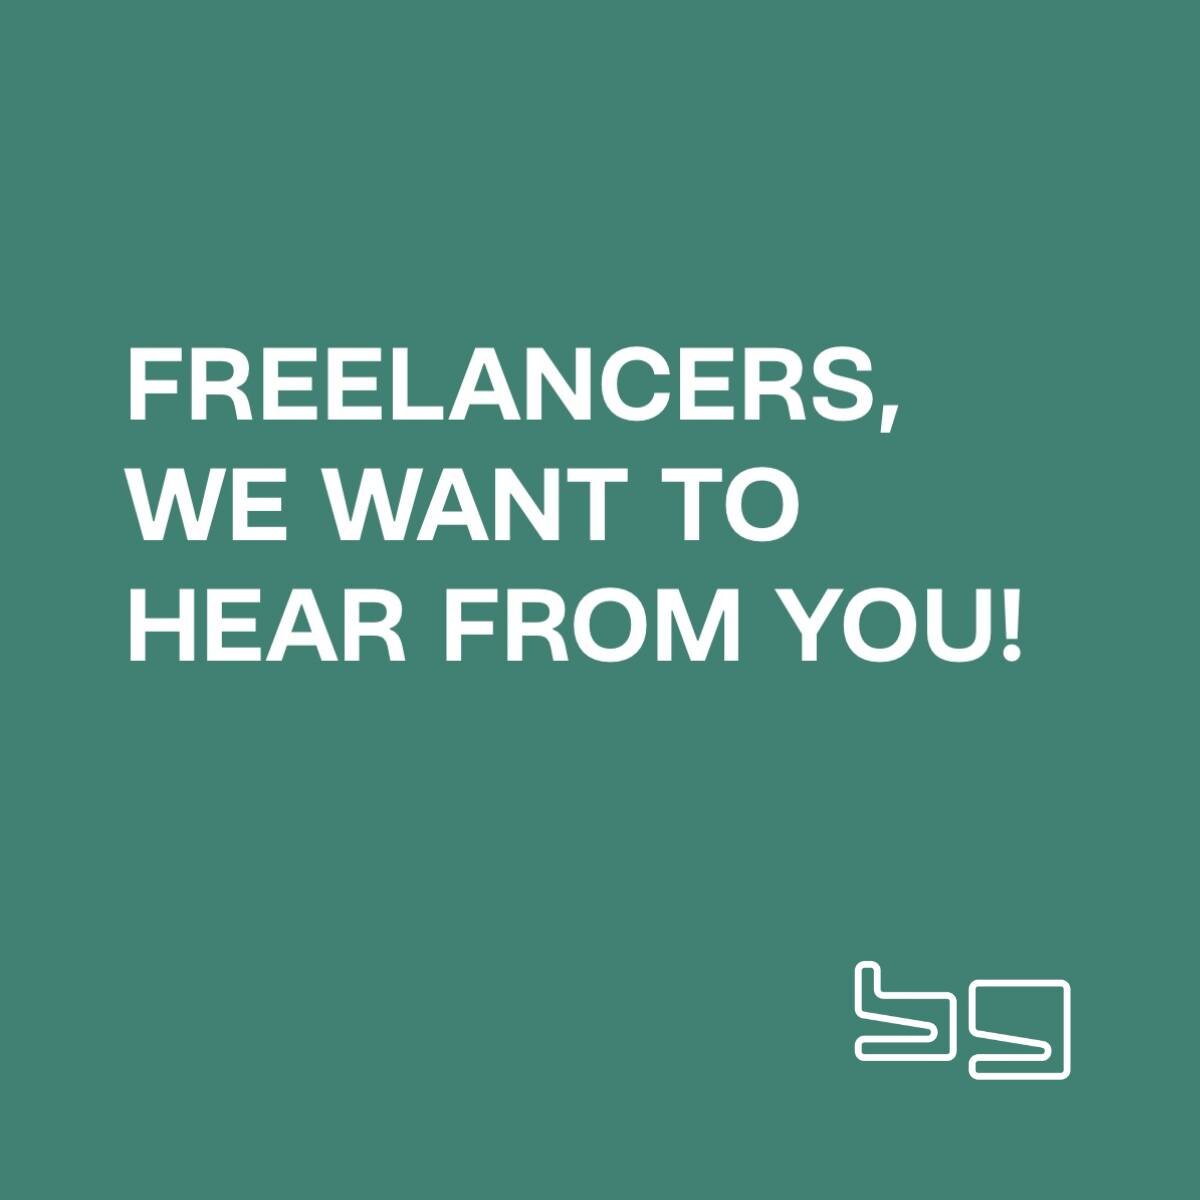 ⭐ FREELANCERS - We want to hear from you! ⭐

With rapid expansion at Better Green, we are excited to expand our network of talented individuals. We have a solid community spirit, take our company culture seriously, embrace diversity, and have high re